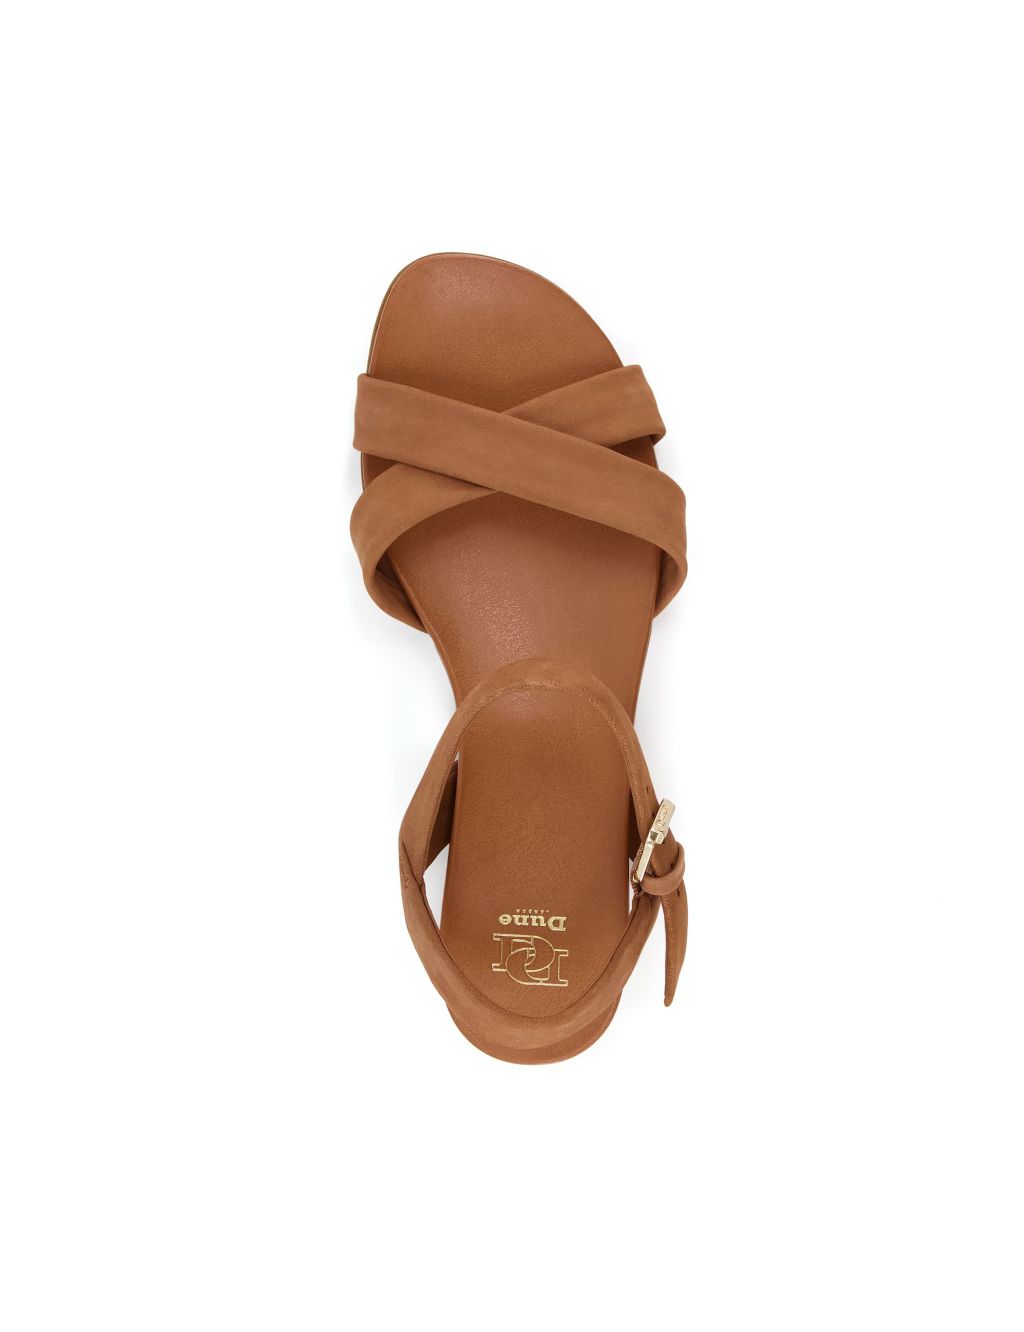 Leather Ankle Strap Wedge Sandals image 4